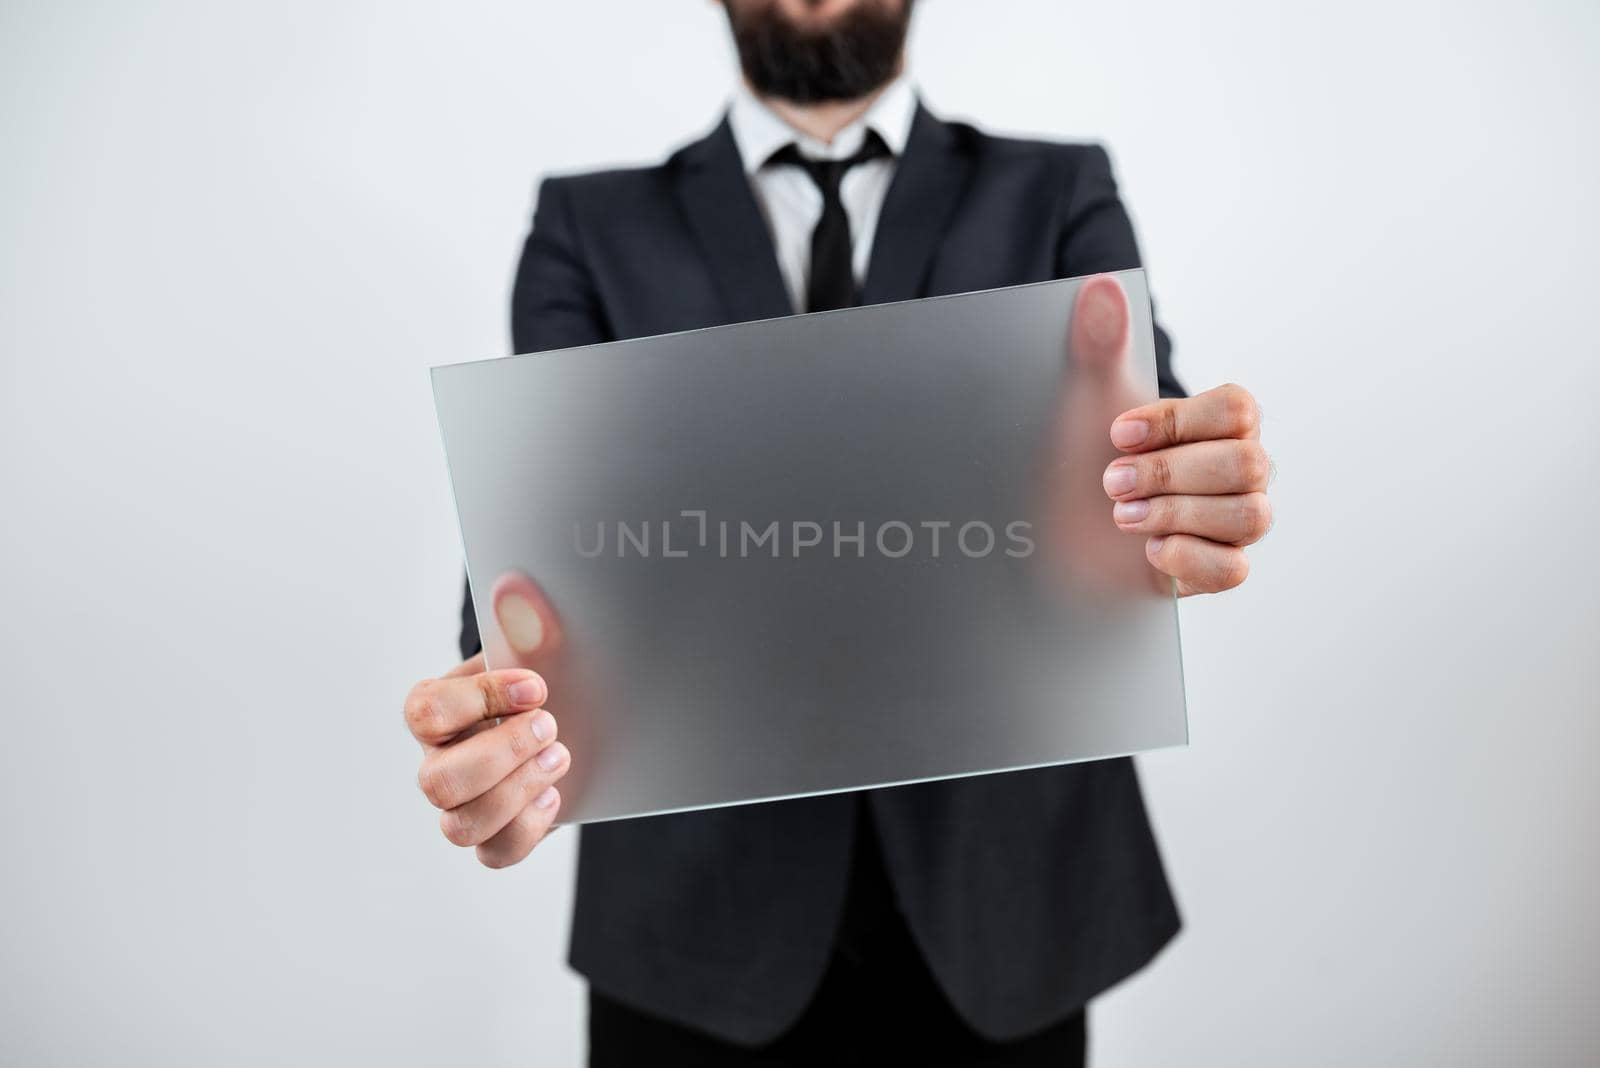 Male Professional Showing Placard And Advertising The Company.